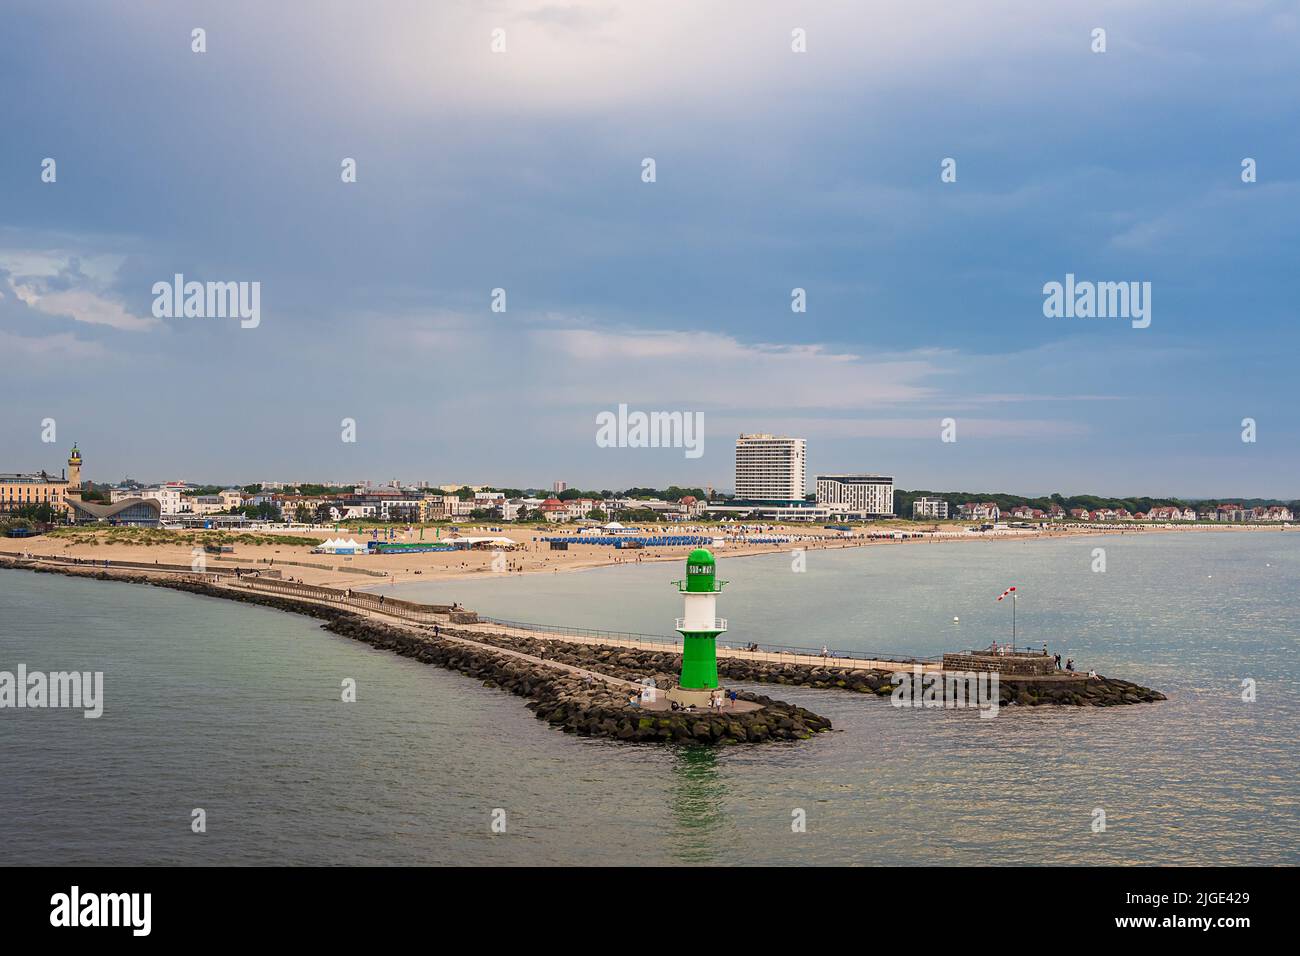 Mole on shore of the Baltic Sea in Warnemuende, Germany. Stock Photo